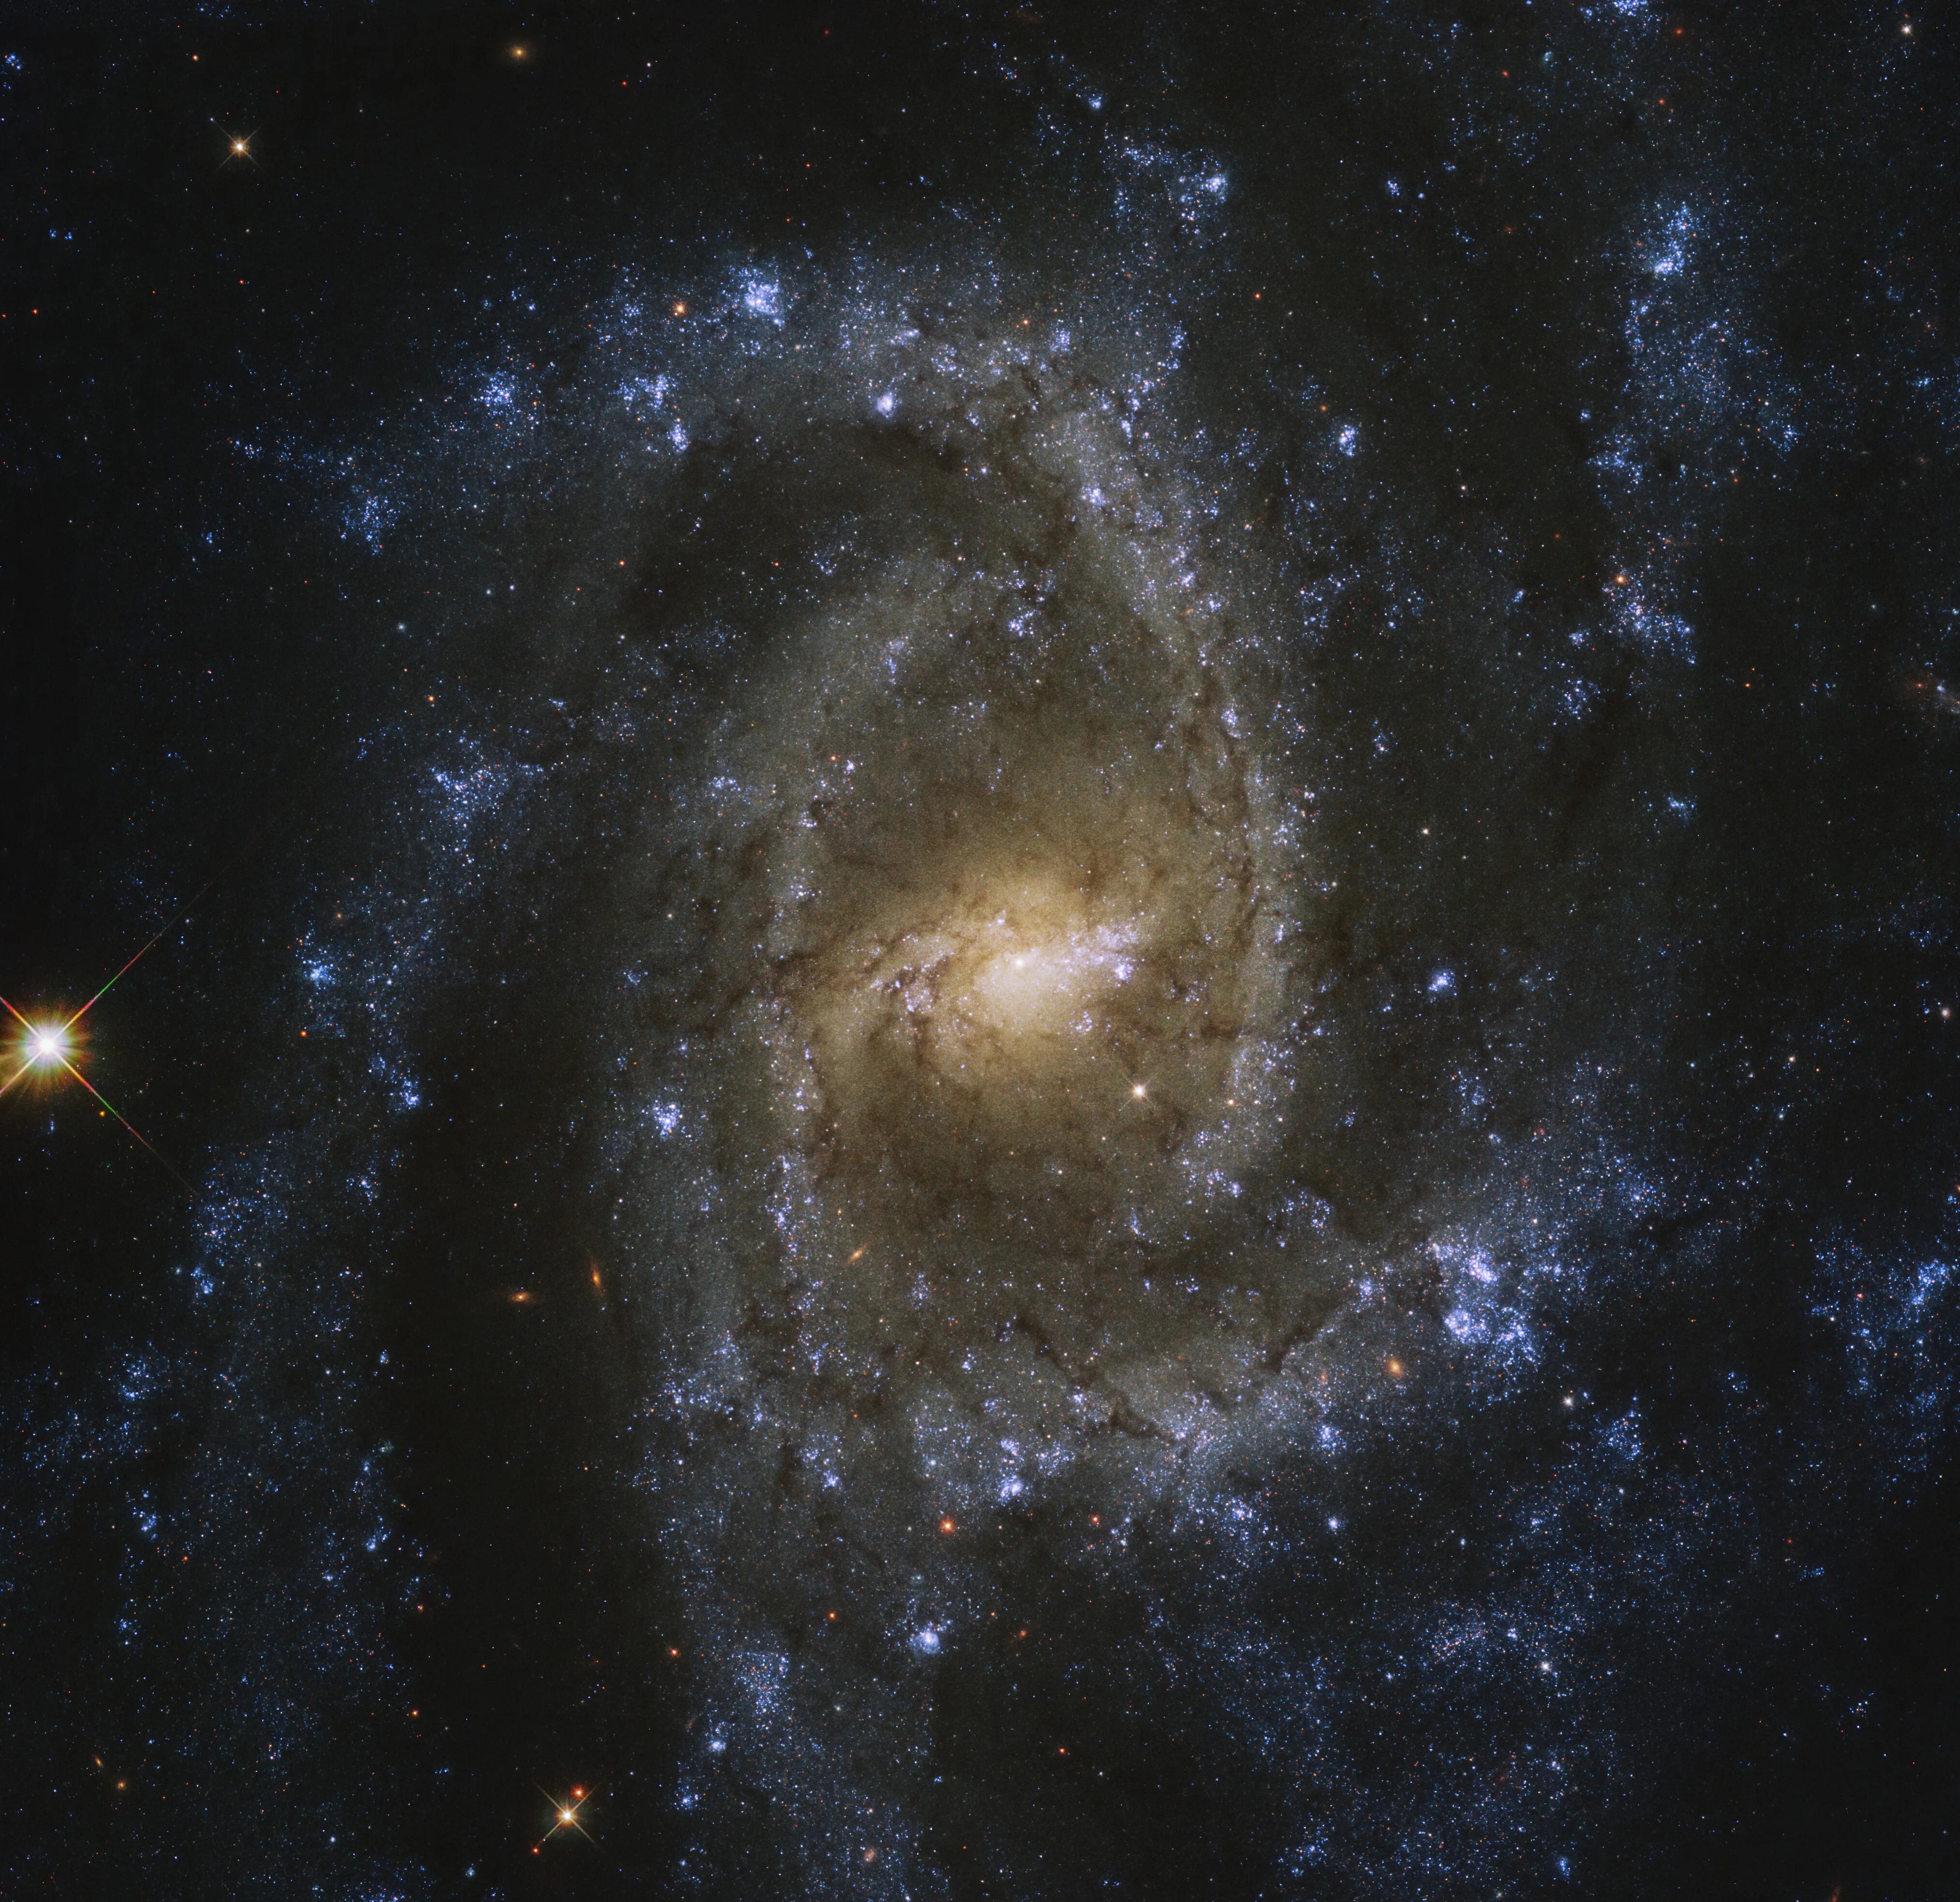 Top-down view of ngc 2835 and its spiral arms, against the black backdrop of space